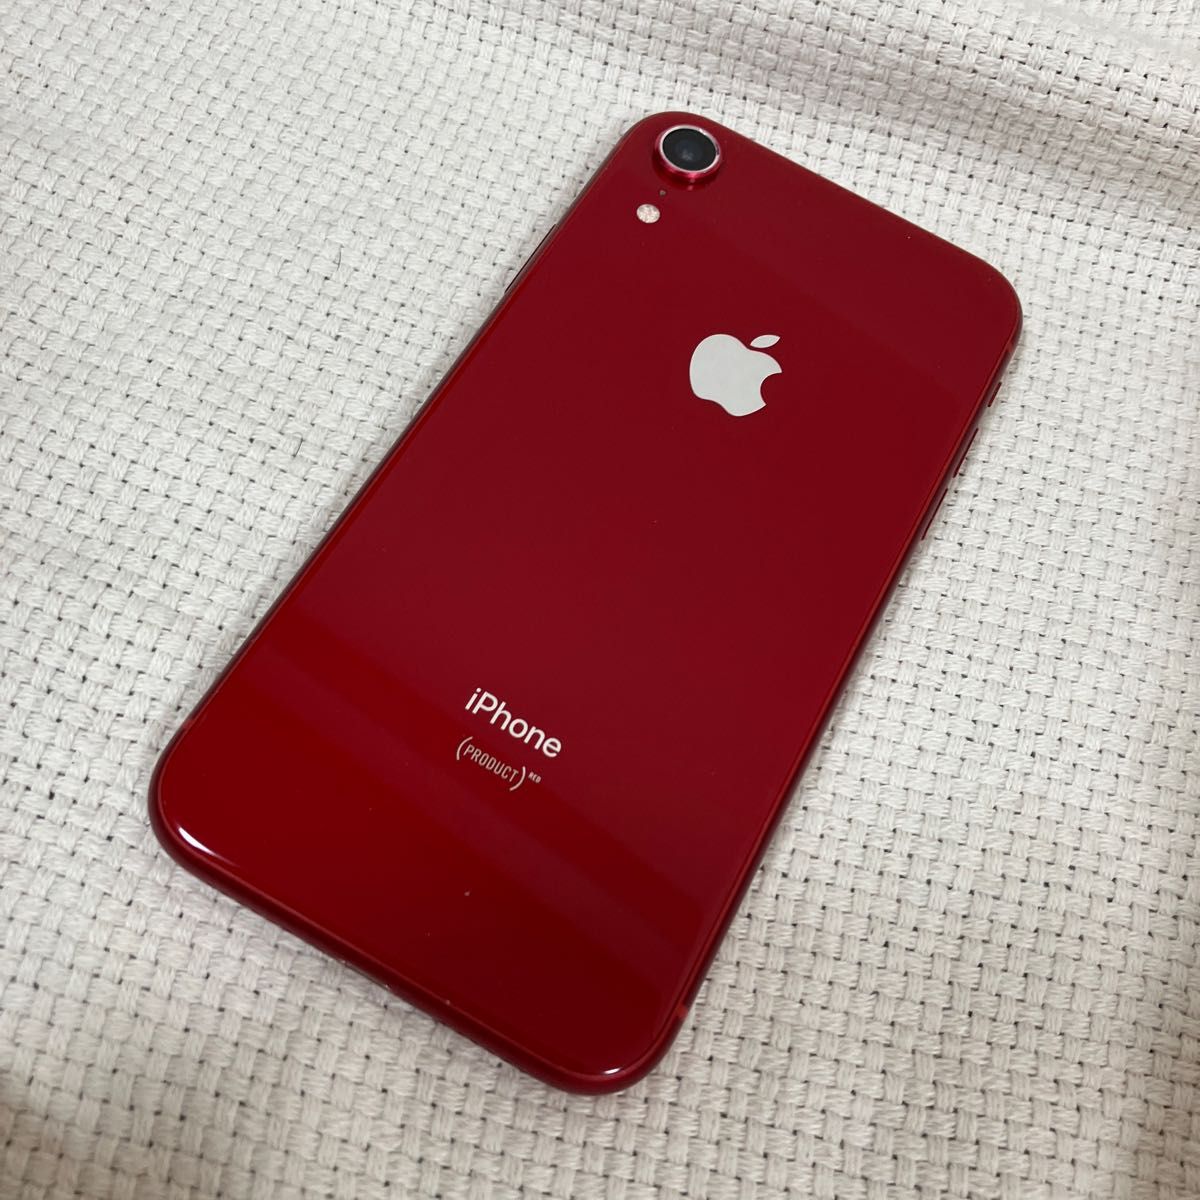 iPhone XR 64GB レッド hybridboats.co.nz